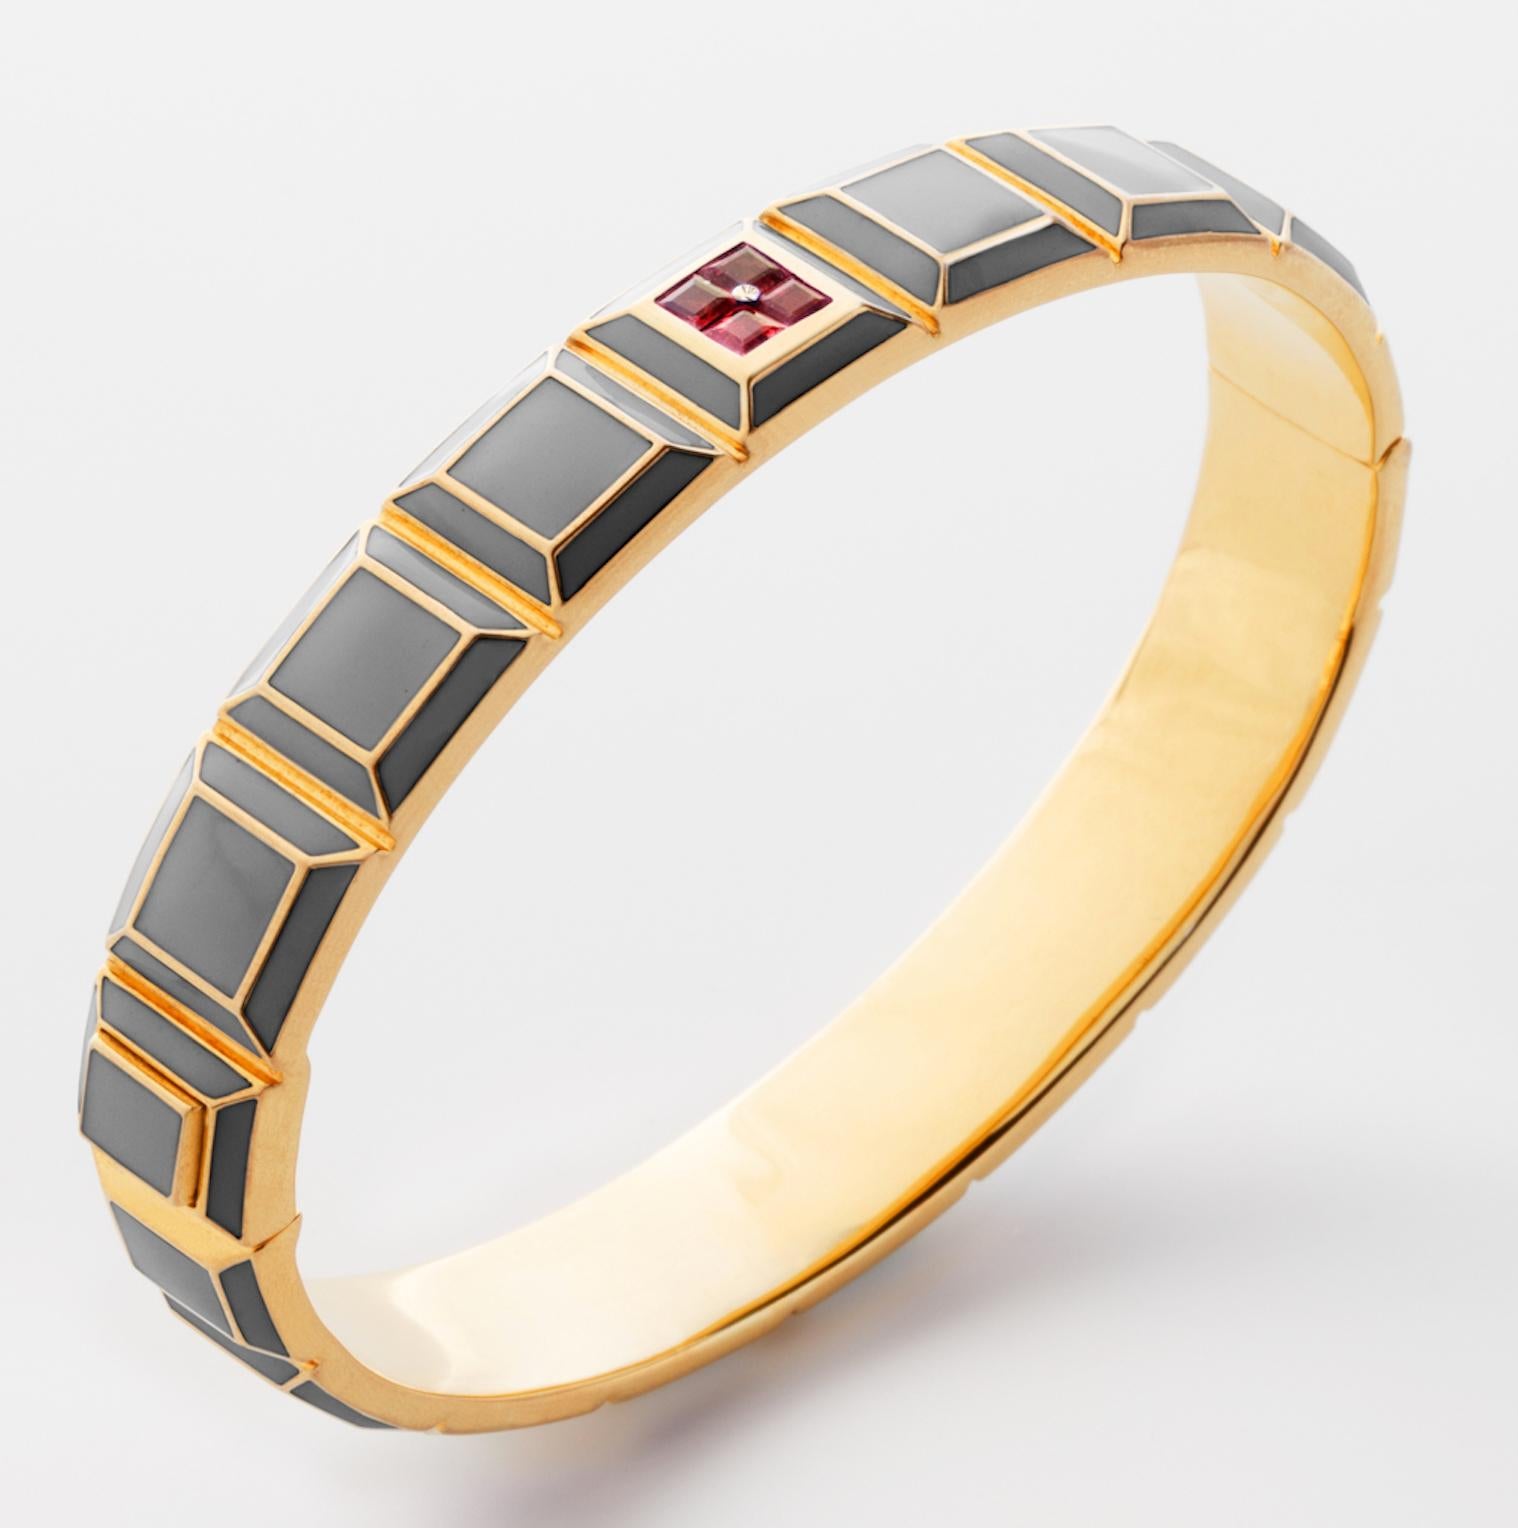 Gold-Plated Enamel Carousel Bracelet features a Yellow Gold-Plated Silver bracelet with Light Grey Enamel and Rubies, along with a clasp closure that secures the bracelet onto the wearer's wrist. 
Yellow Gold-Plated Silver, Light Grey Enamel, Rubies